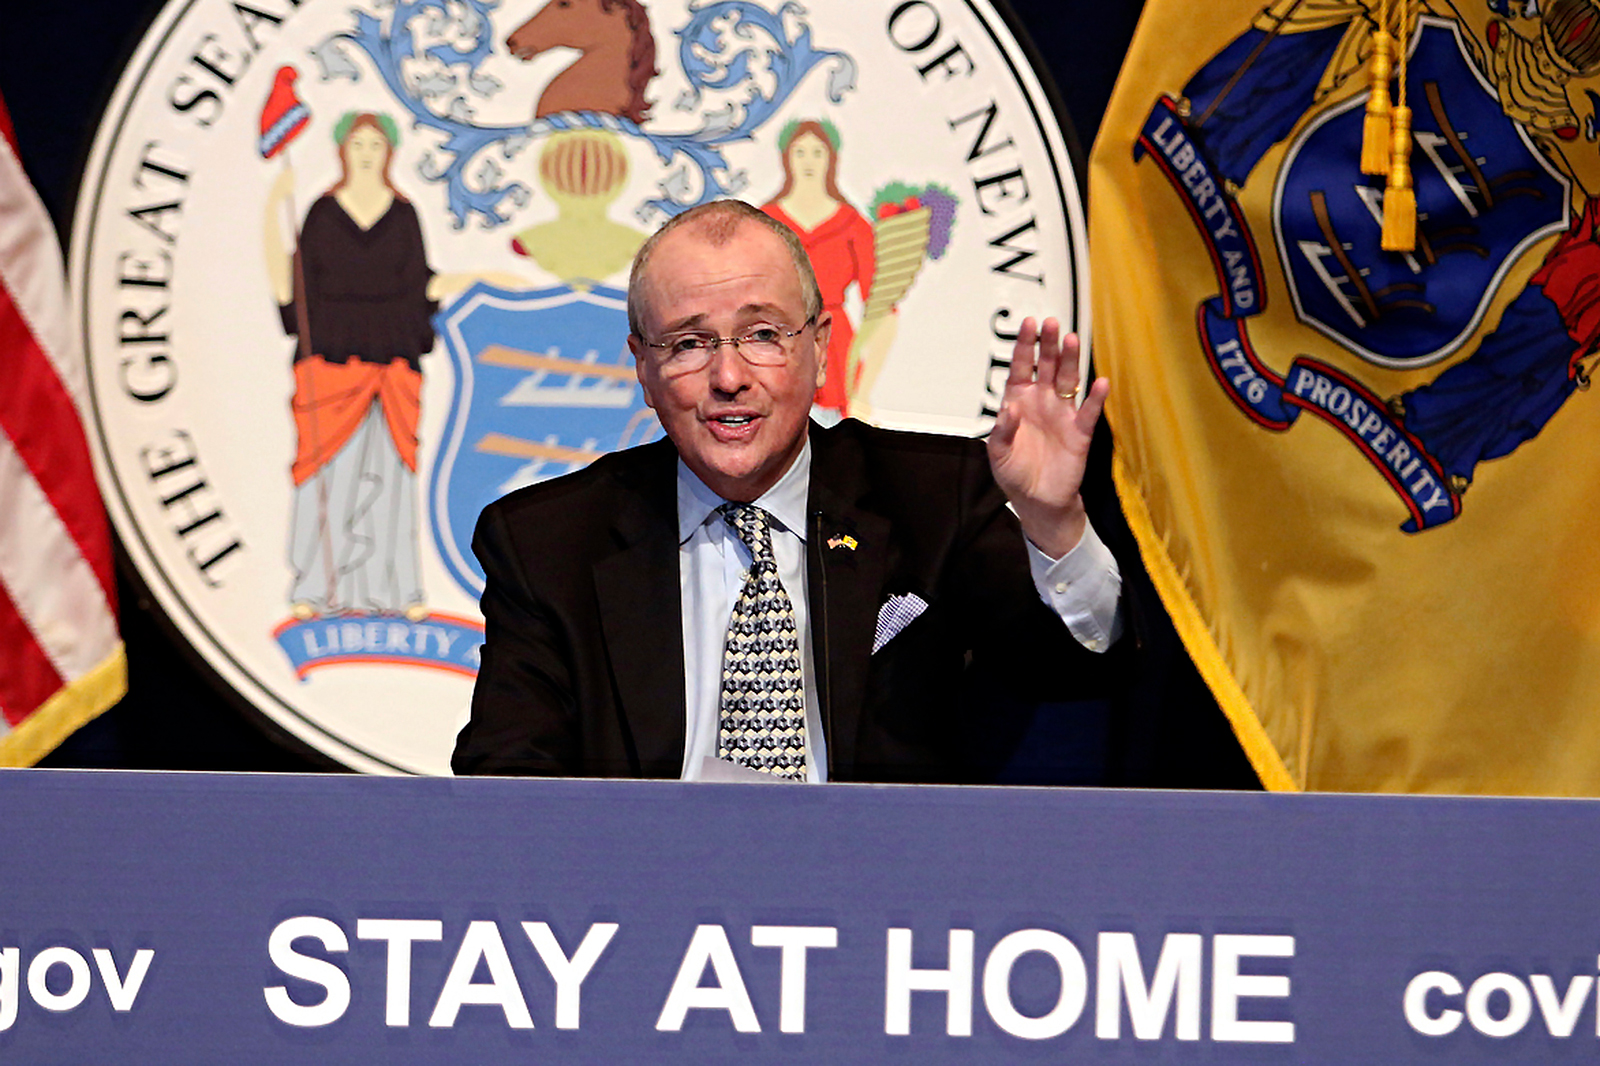 New Jersey Gov. Phil Murphy updates the state on the coronavirus pandemic during a press conference in Trenton, New Jersey on April 24.